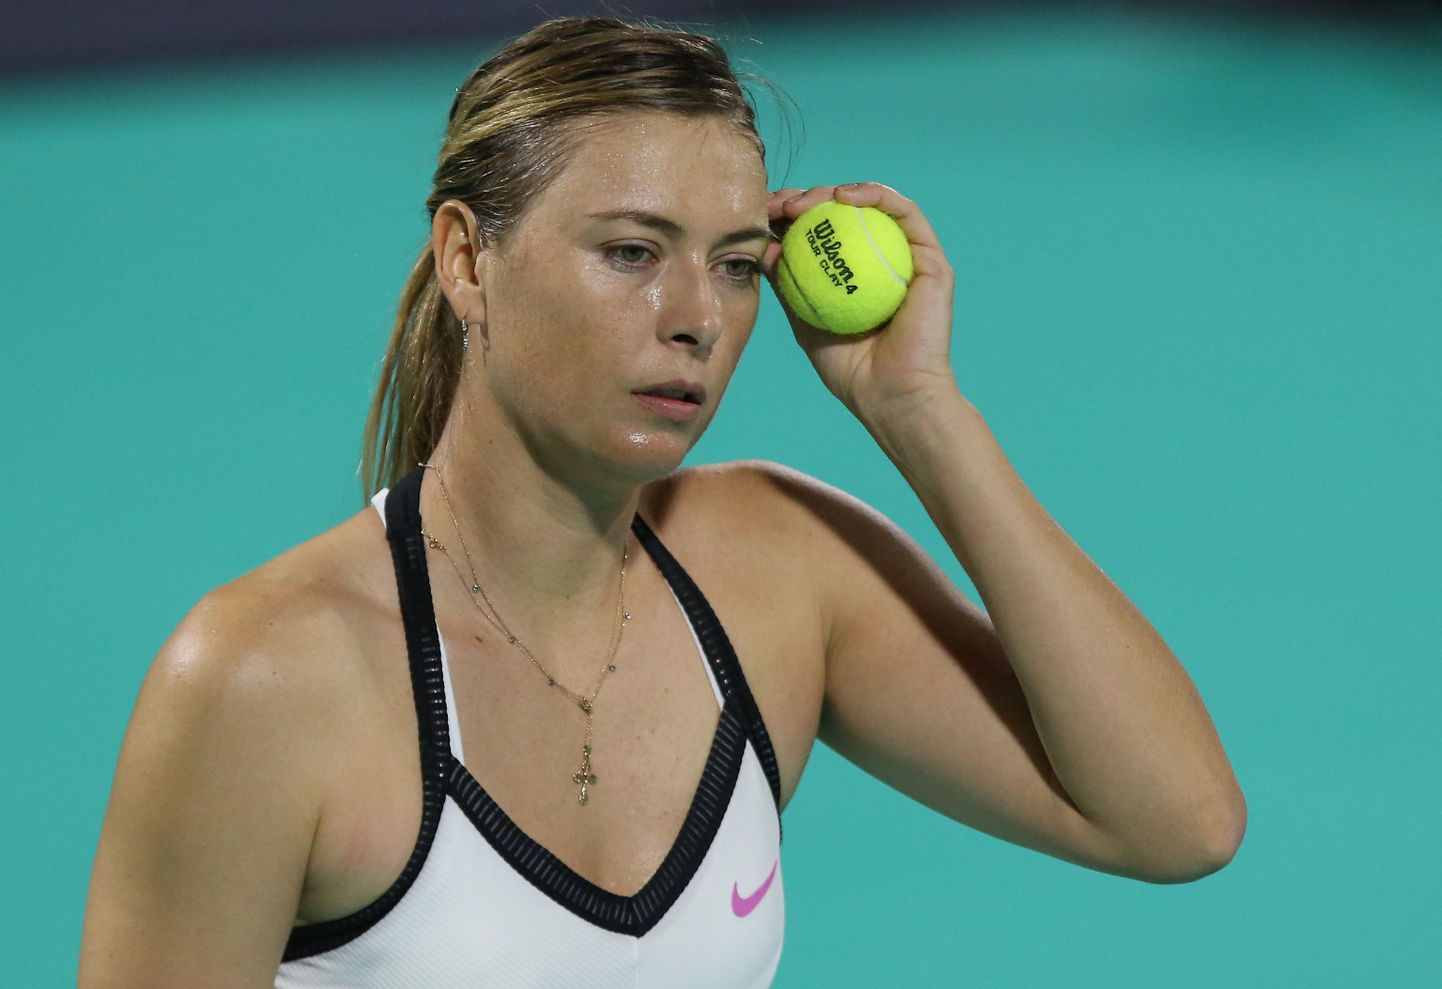 Maria Sharapova of Russia reacts during her match with Ajla Tomljanovic of Australia (unseen) at the Mubadala World Tennis Championship at Zayed Sports City in Abu Dhabi on December 19, 2019. (Photo by - / AFP)